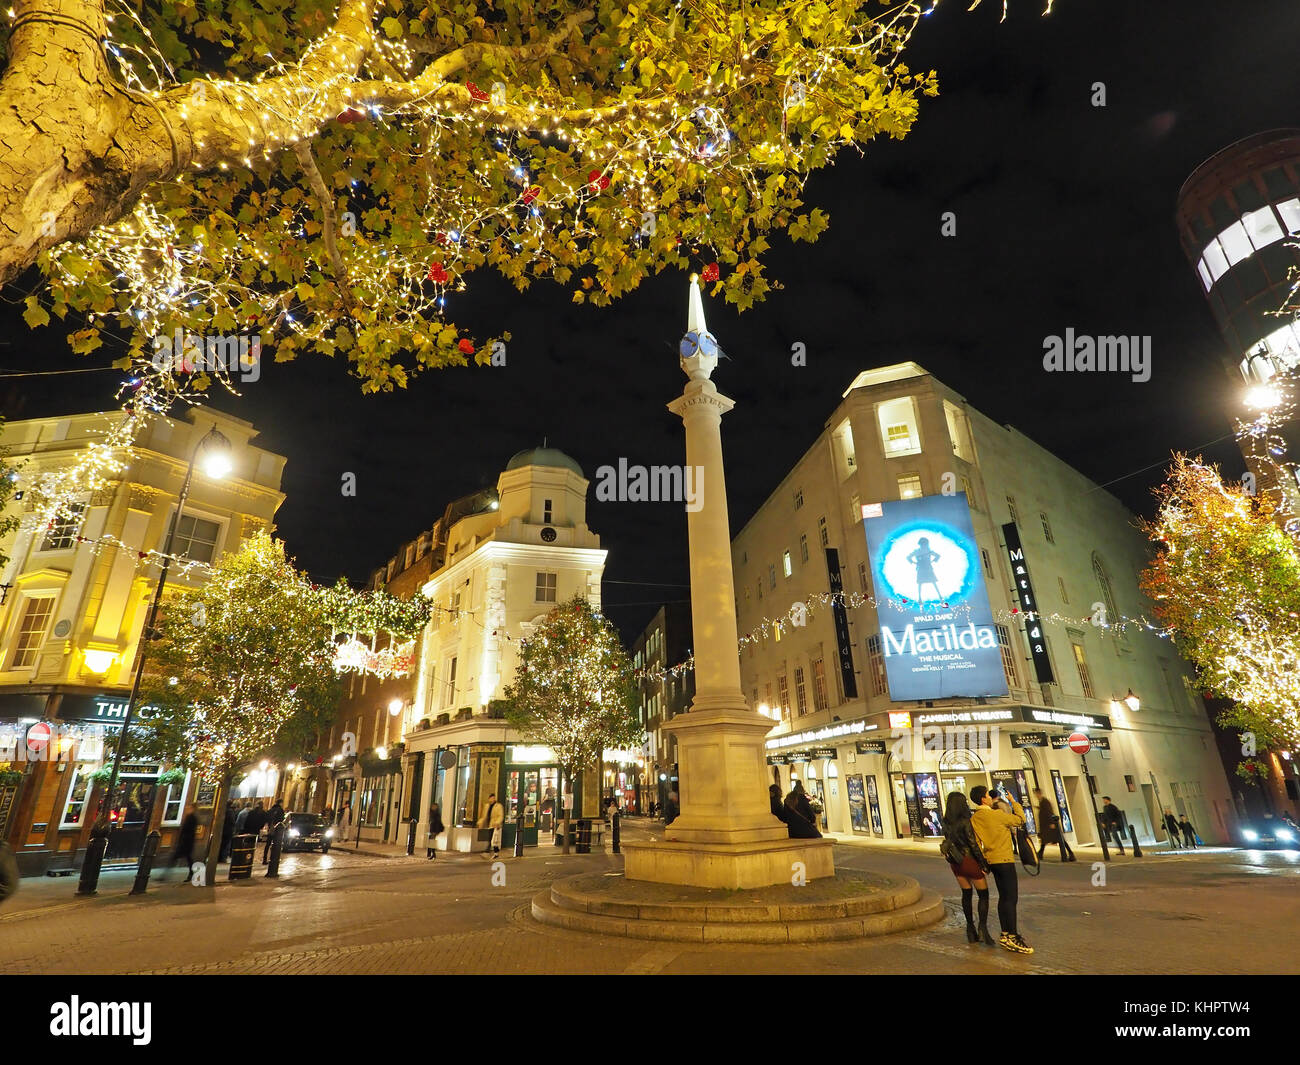 View of the London Seven Dials road junction decorated at night for Christmas Stock Photo